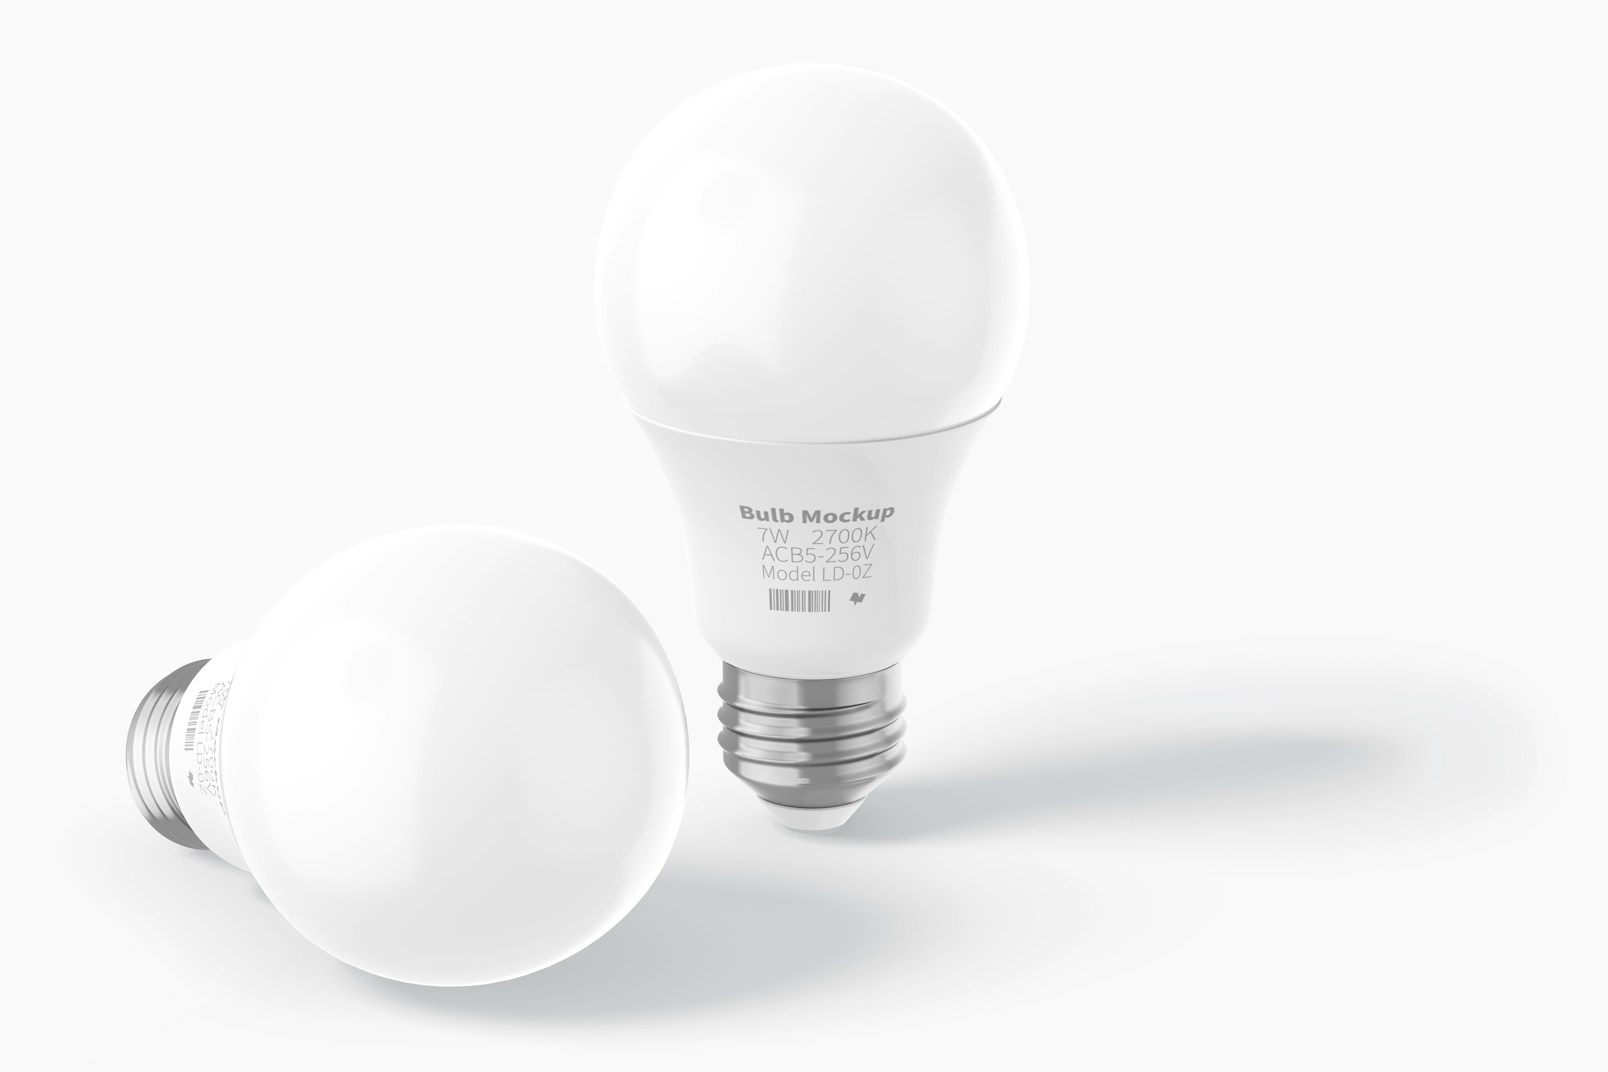 Bulb Mockup, Standing and Dropped